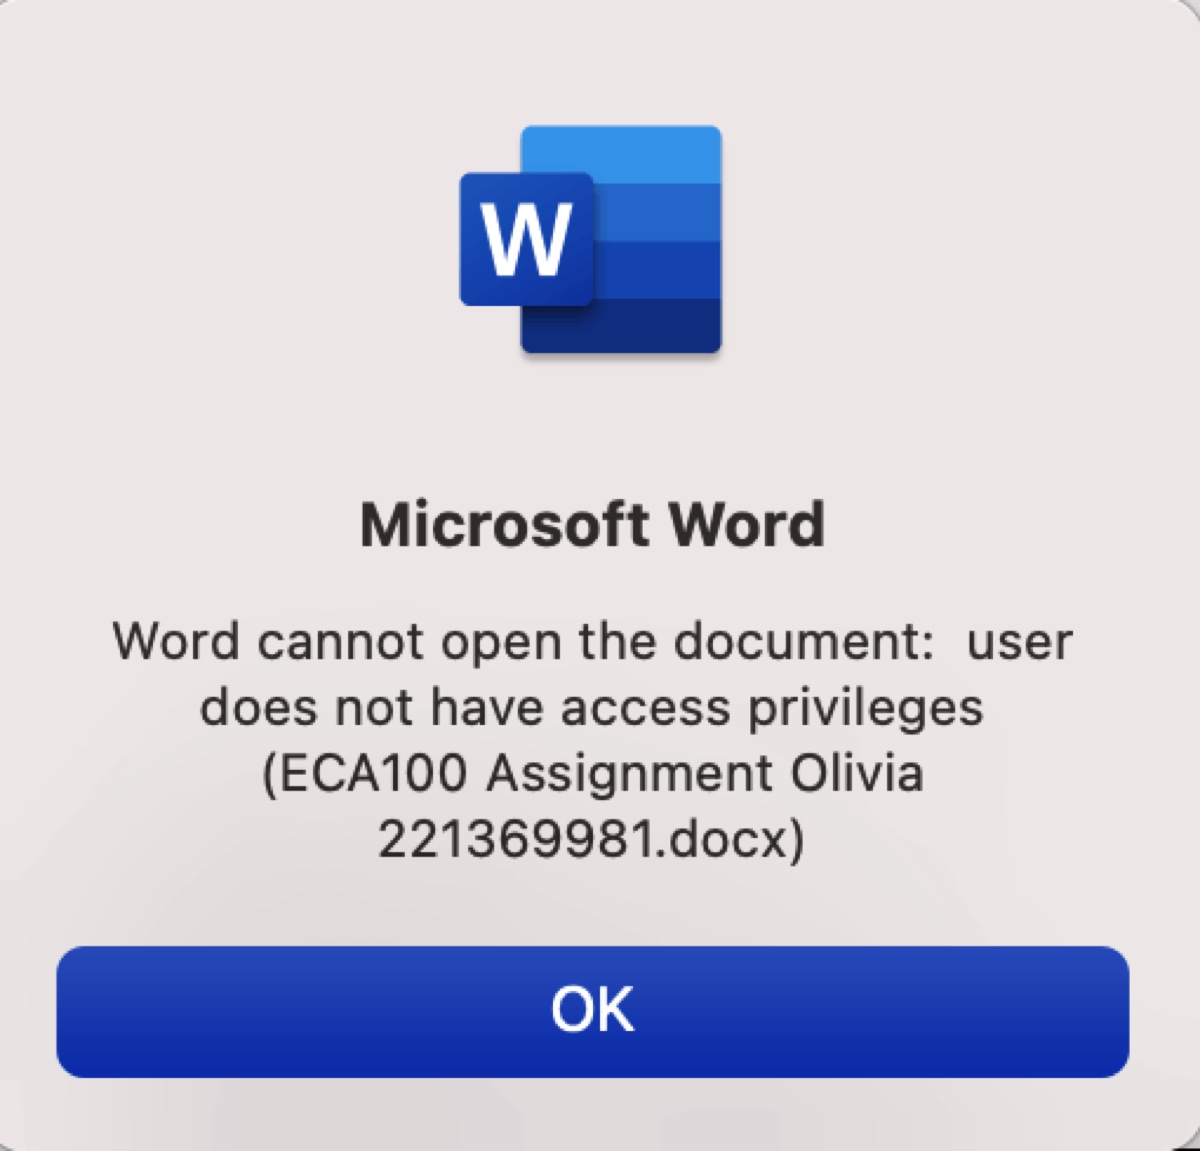 Error Word cannot open document user does not have access privileges on Mac